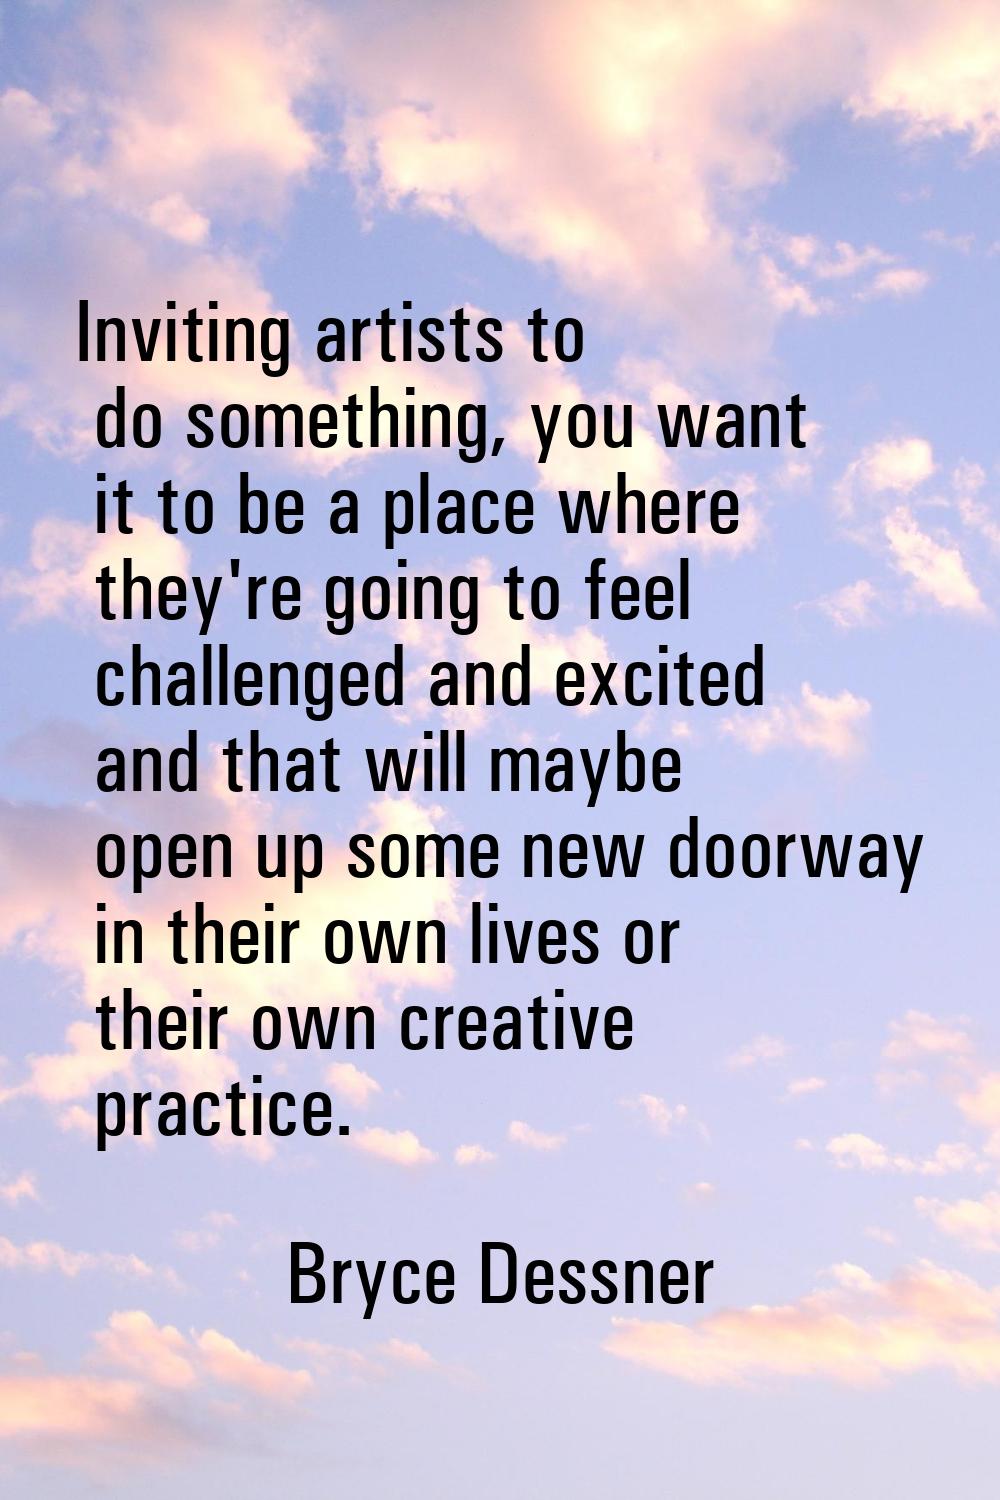 Inviting artists to do something, you want it to be a place where they're going to feel challenged 